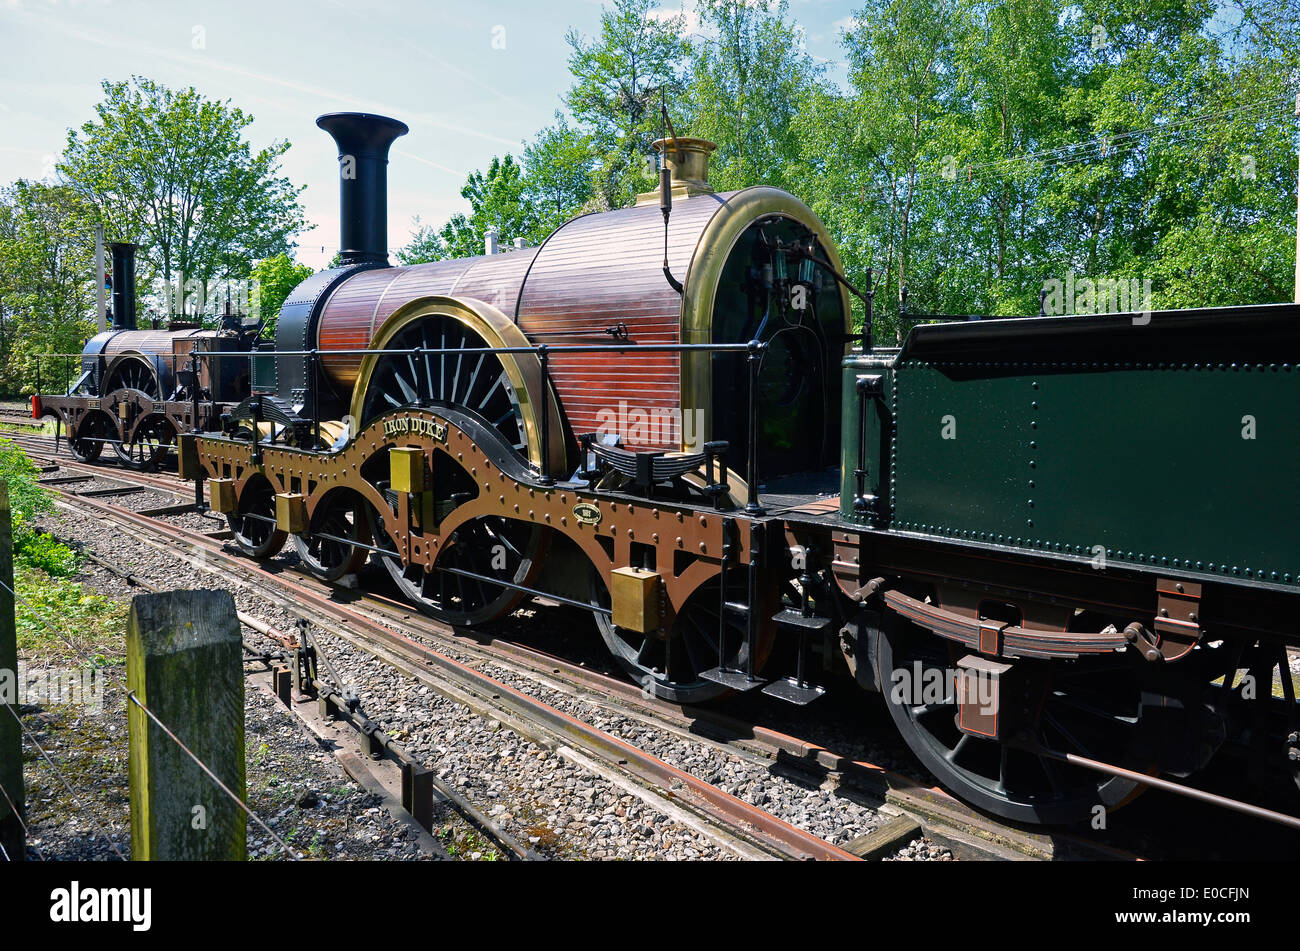 Didcot Railway Centre, home of the Great Western Society. Two replica broad gauge steam engines designed by Gooch on display. Stock Photo